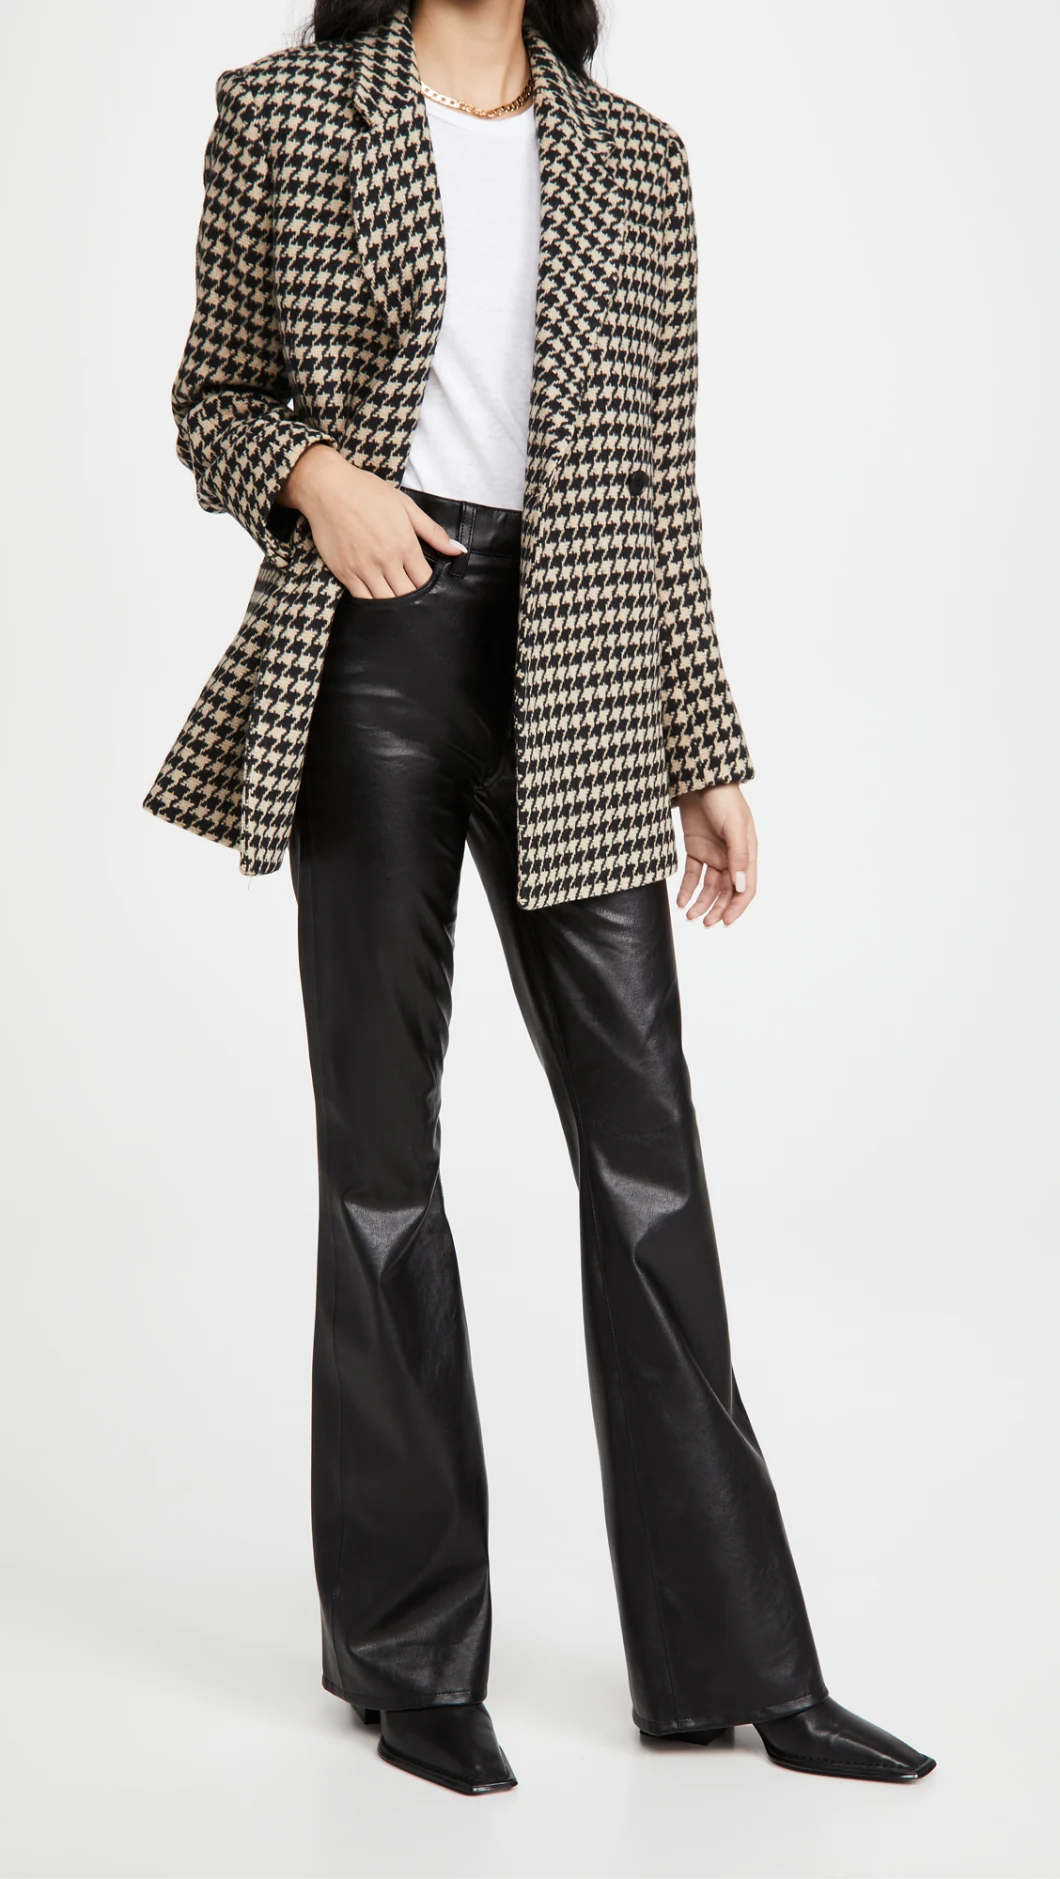 OEM Winter Thick Fashion Double-Breasted Houndstooth Print Jacquard Jacket Women Coat